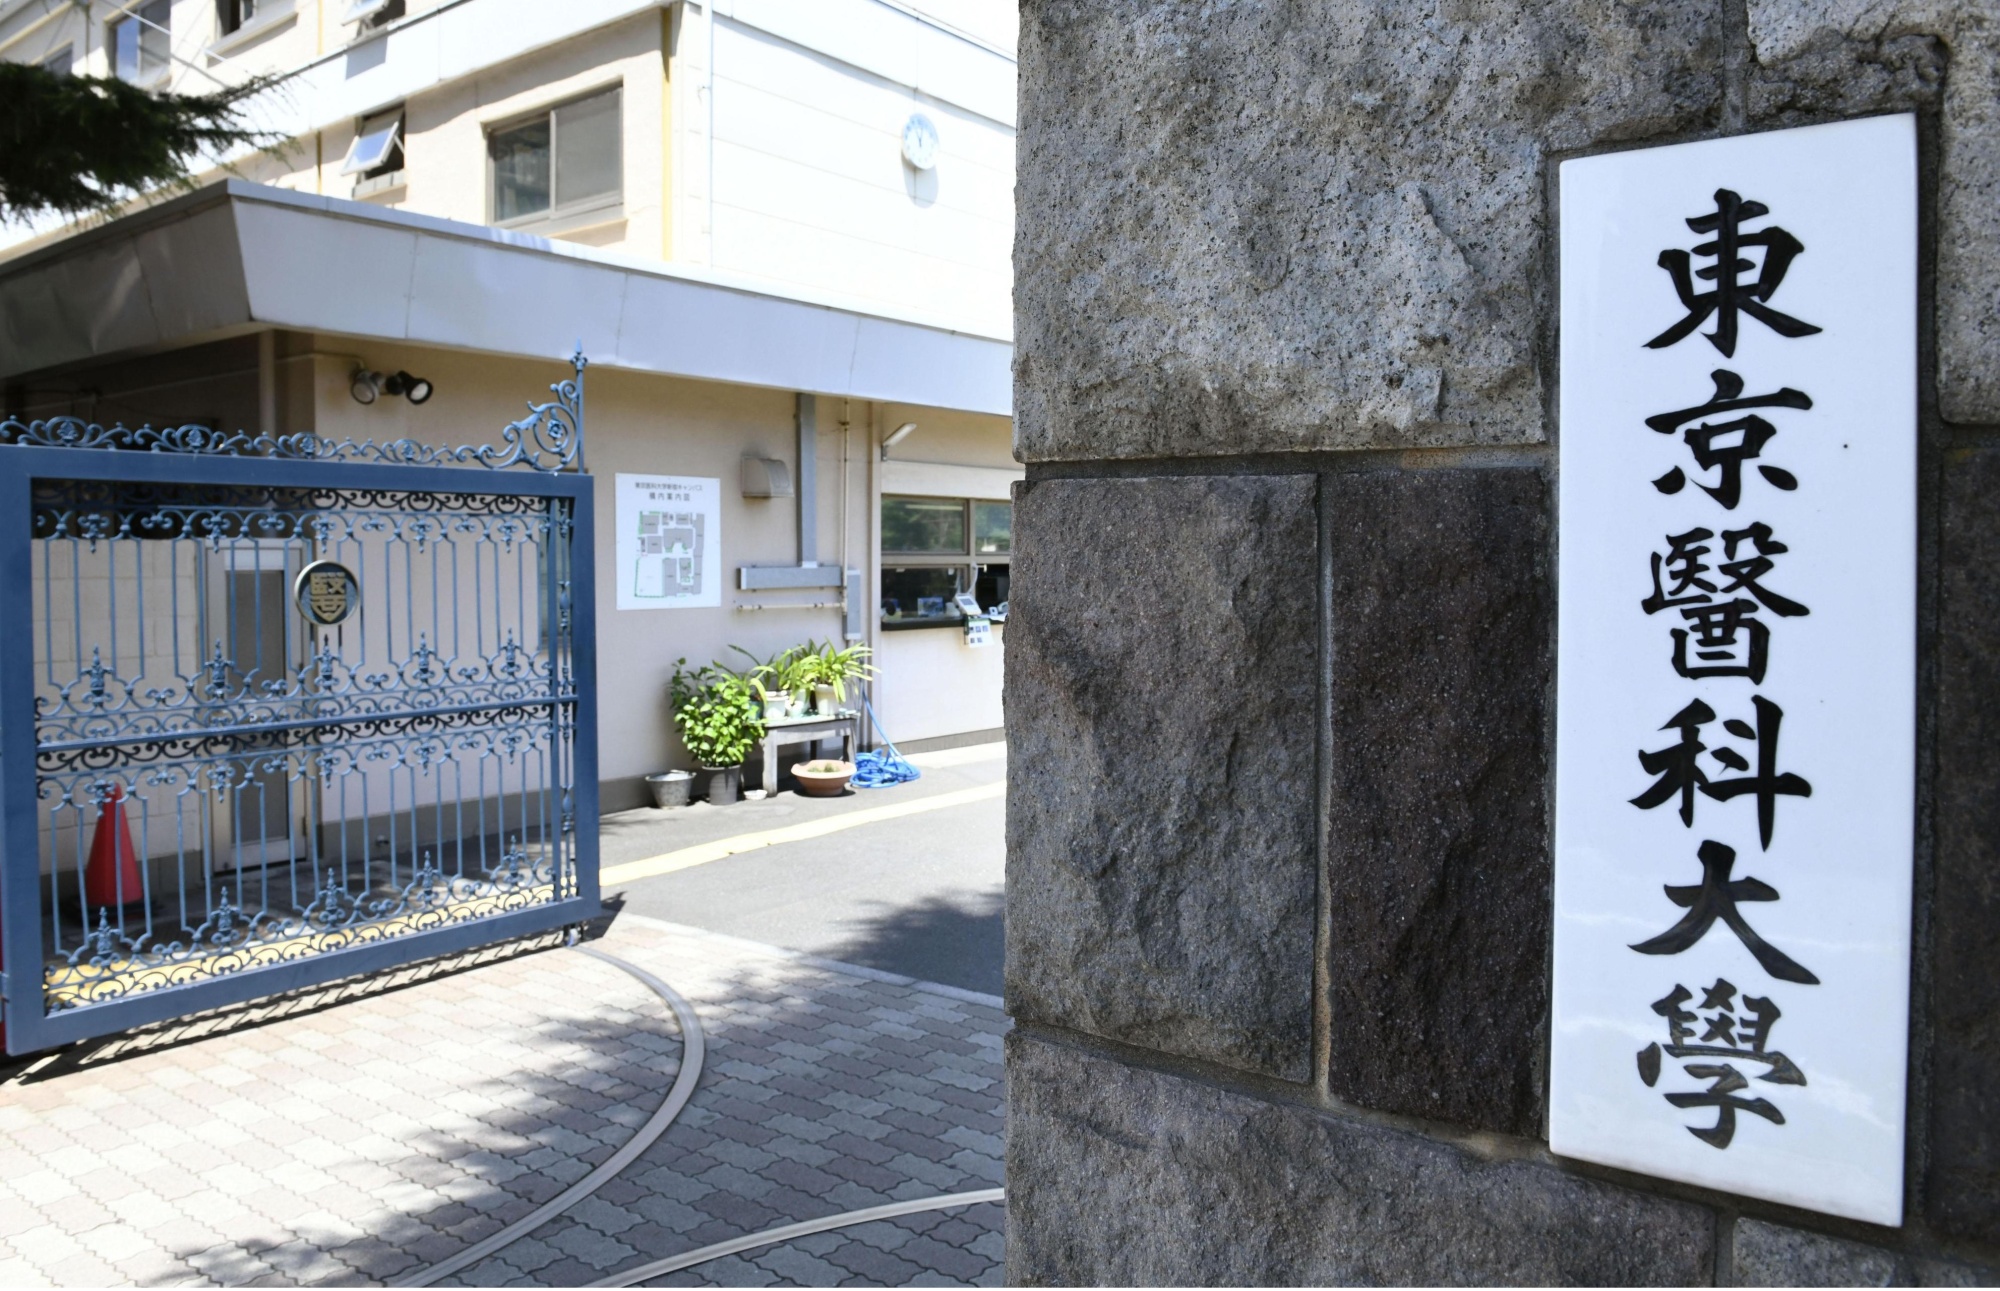 Tokyo Medical University, seen in this photo, deducted points from female applicants' entrance exams to keep the ratio of women studying at the university at about 30 percent, sources said Thursday. | KYODO